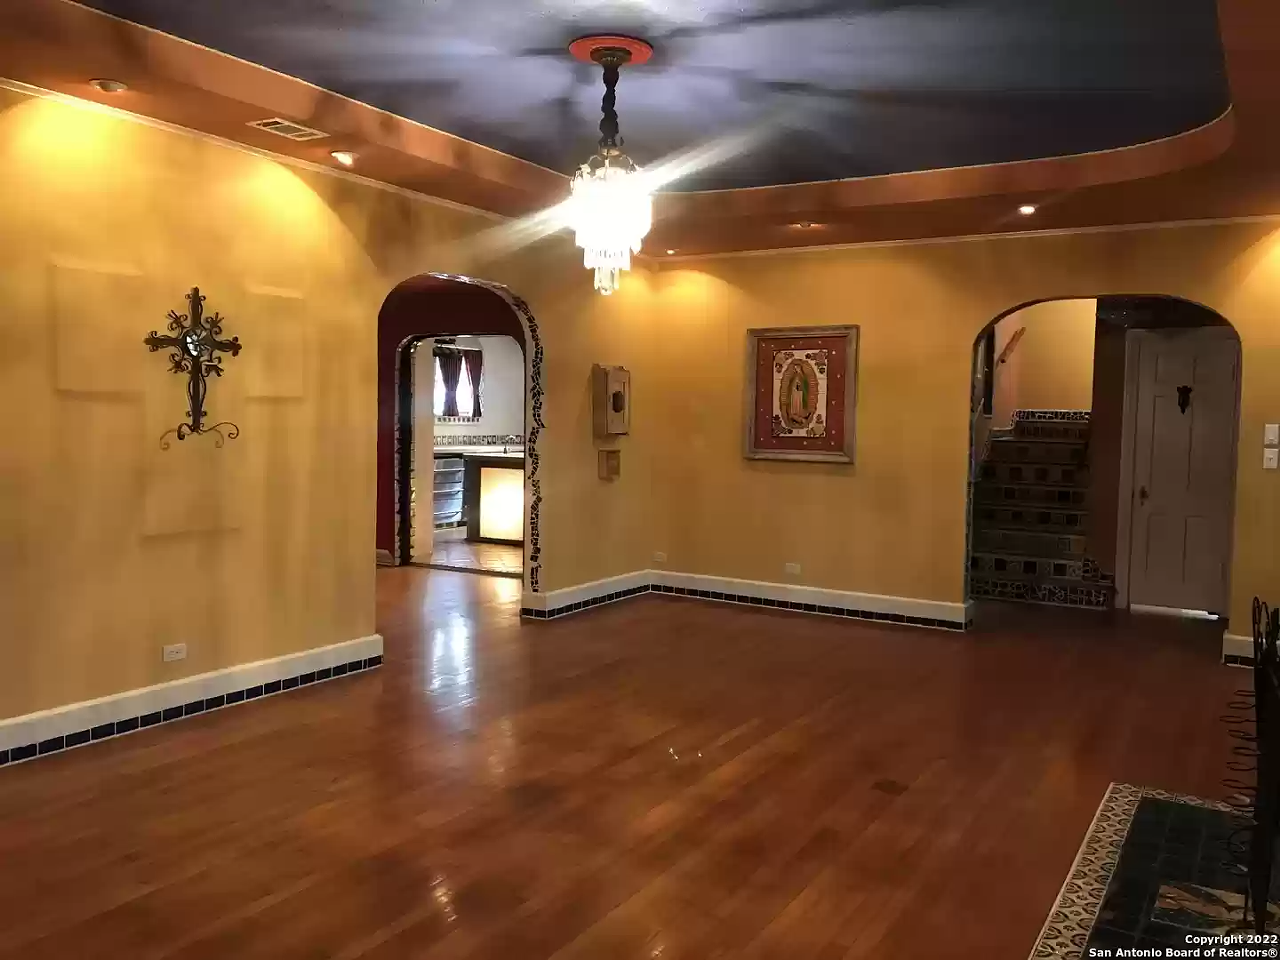 A San Antonio home with mosaic ceilings and a bar that looks like a piano is back on the market